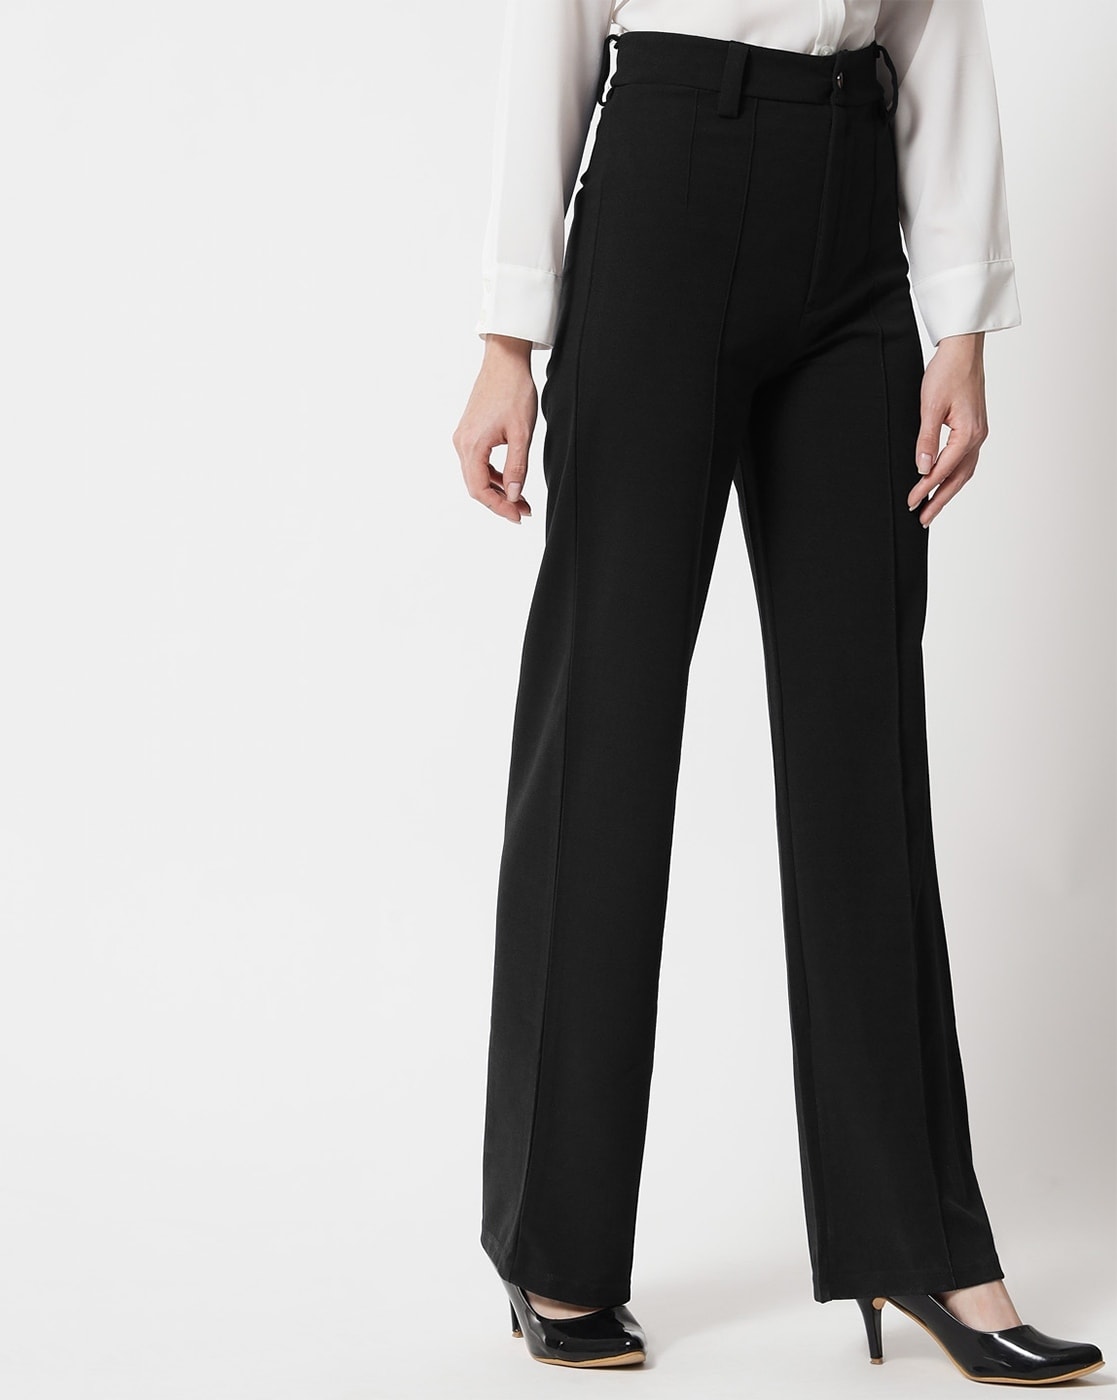 Buy Grey Trousers & Pants for Men by Marks & Spencer Online | Ajio.com